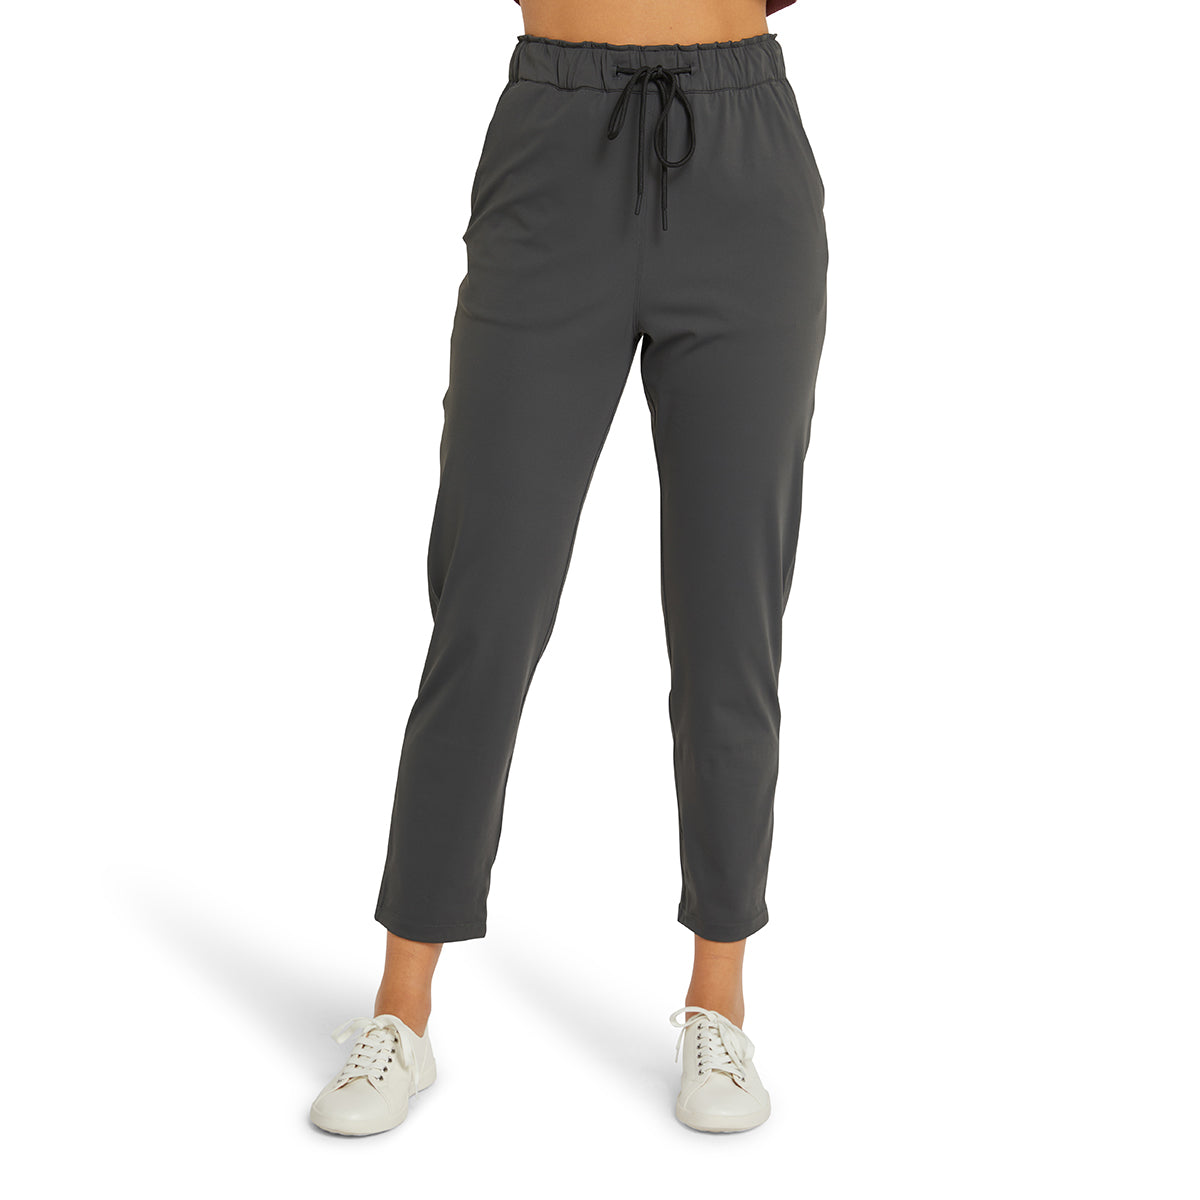 Tie Up Daily Pants - Charcoal